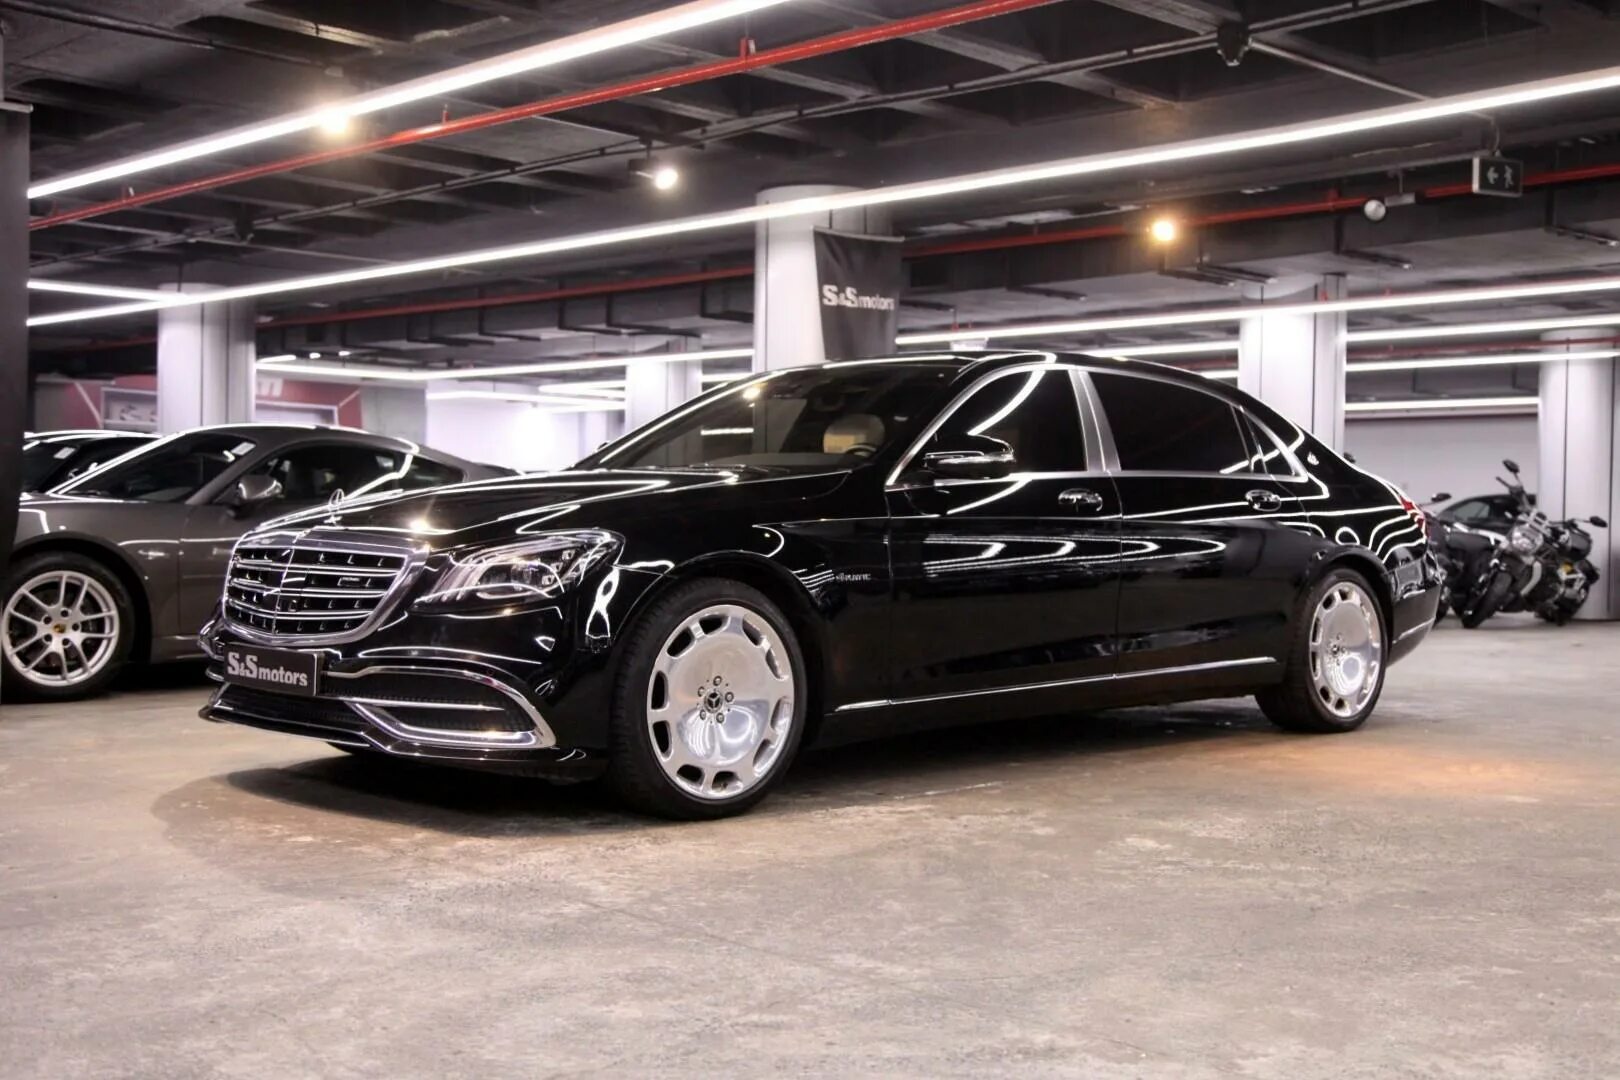 Mercedes s450. Mercedes-Maybach s 450 4matic. Мерседес s450 4matic Maybach. S 450 4 matic Maybach. Mercedes-Benz s 450 4matic Maybach.